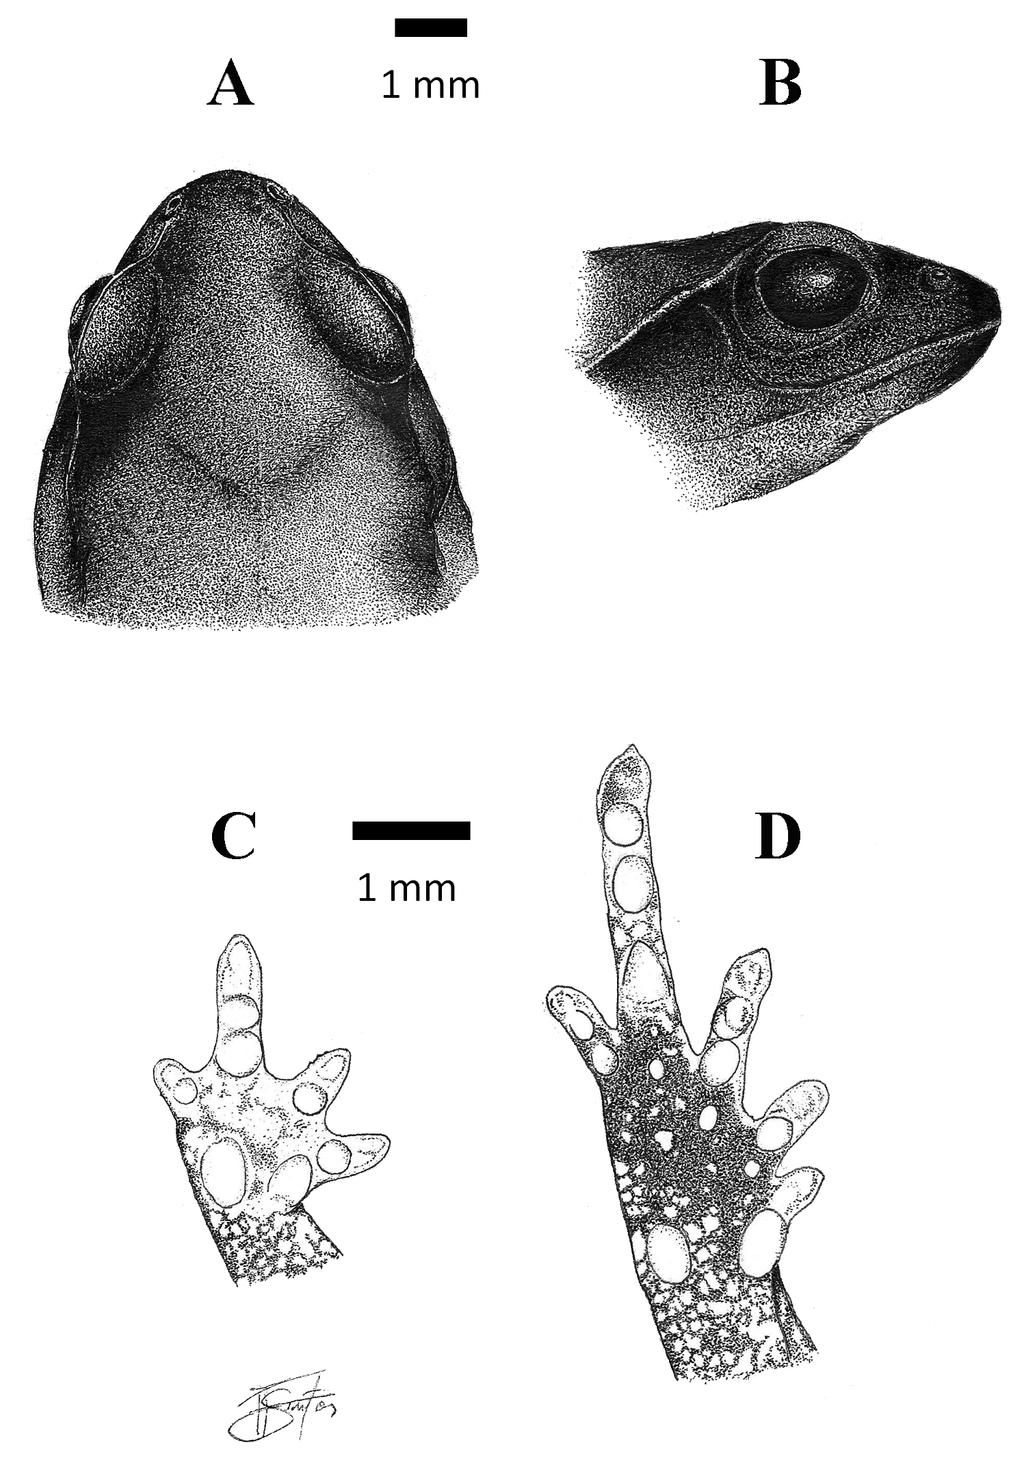 FIGURE 5. Euparkerella cryptica sp. nov. from Silva Jardim, RJ, Brazil, holotype (ZUFRJ 13281). Dorsal (A) and lateral (B) views of the head. Ventral views of the right hand (C) and foot (D).